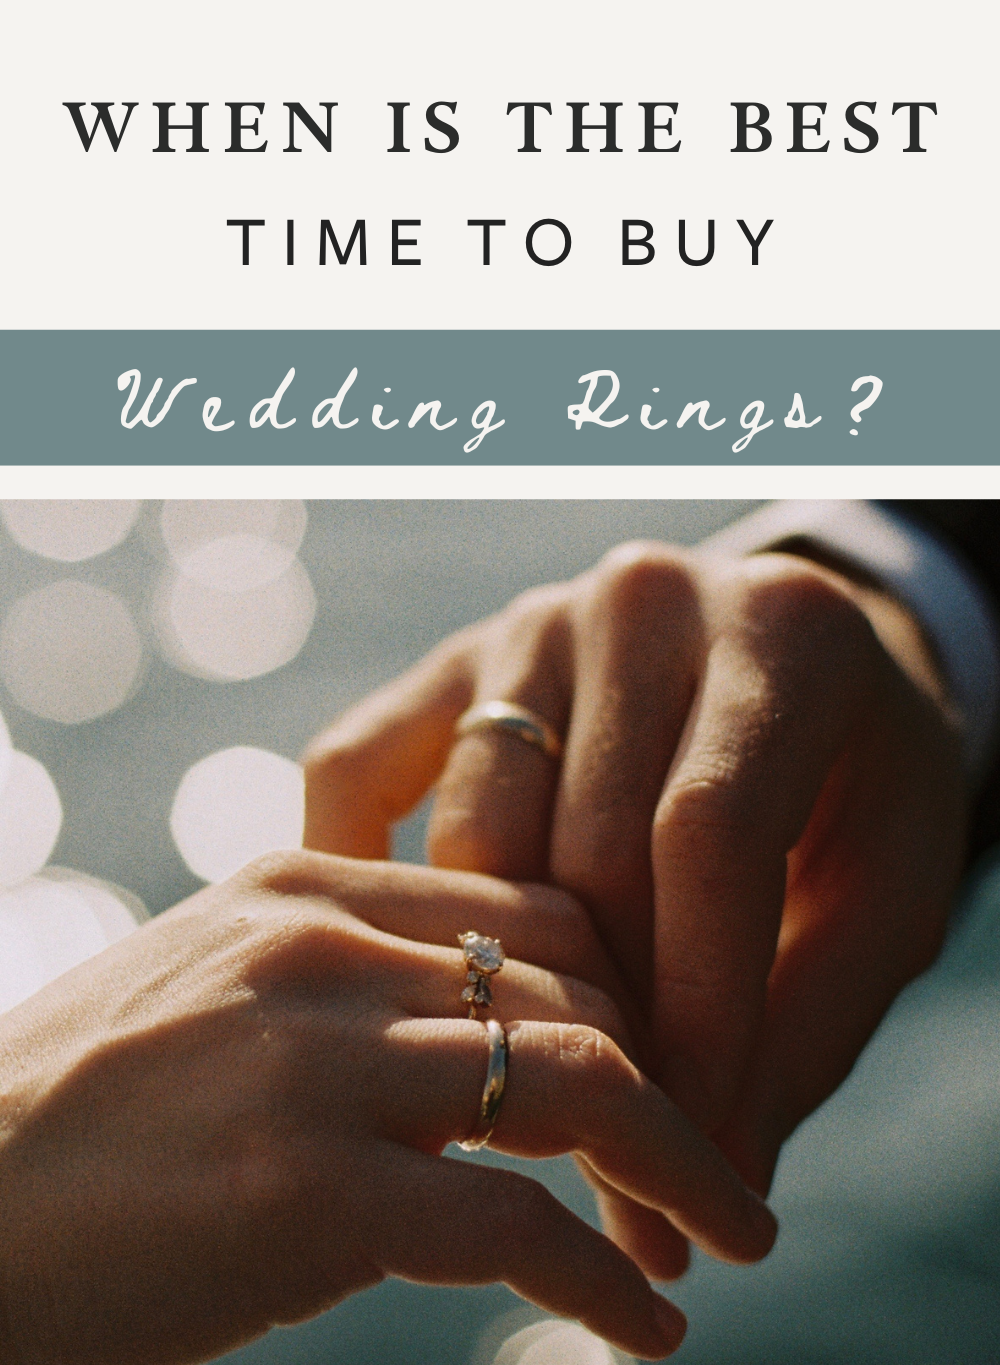 When Is the Best Time to Buy Wedding Rings? – Rustic and Main